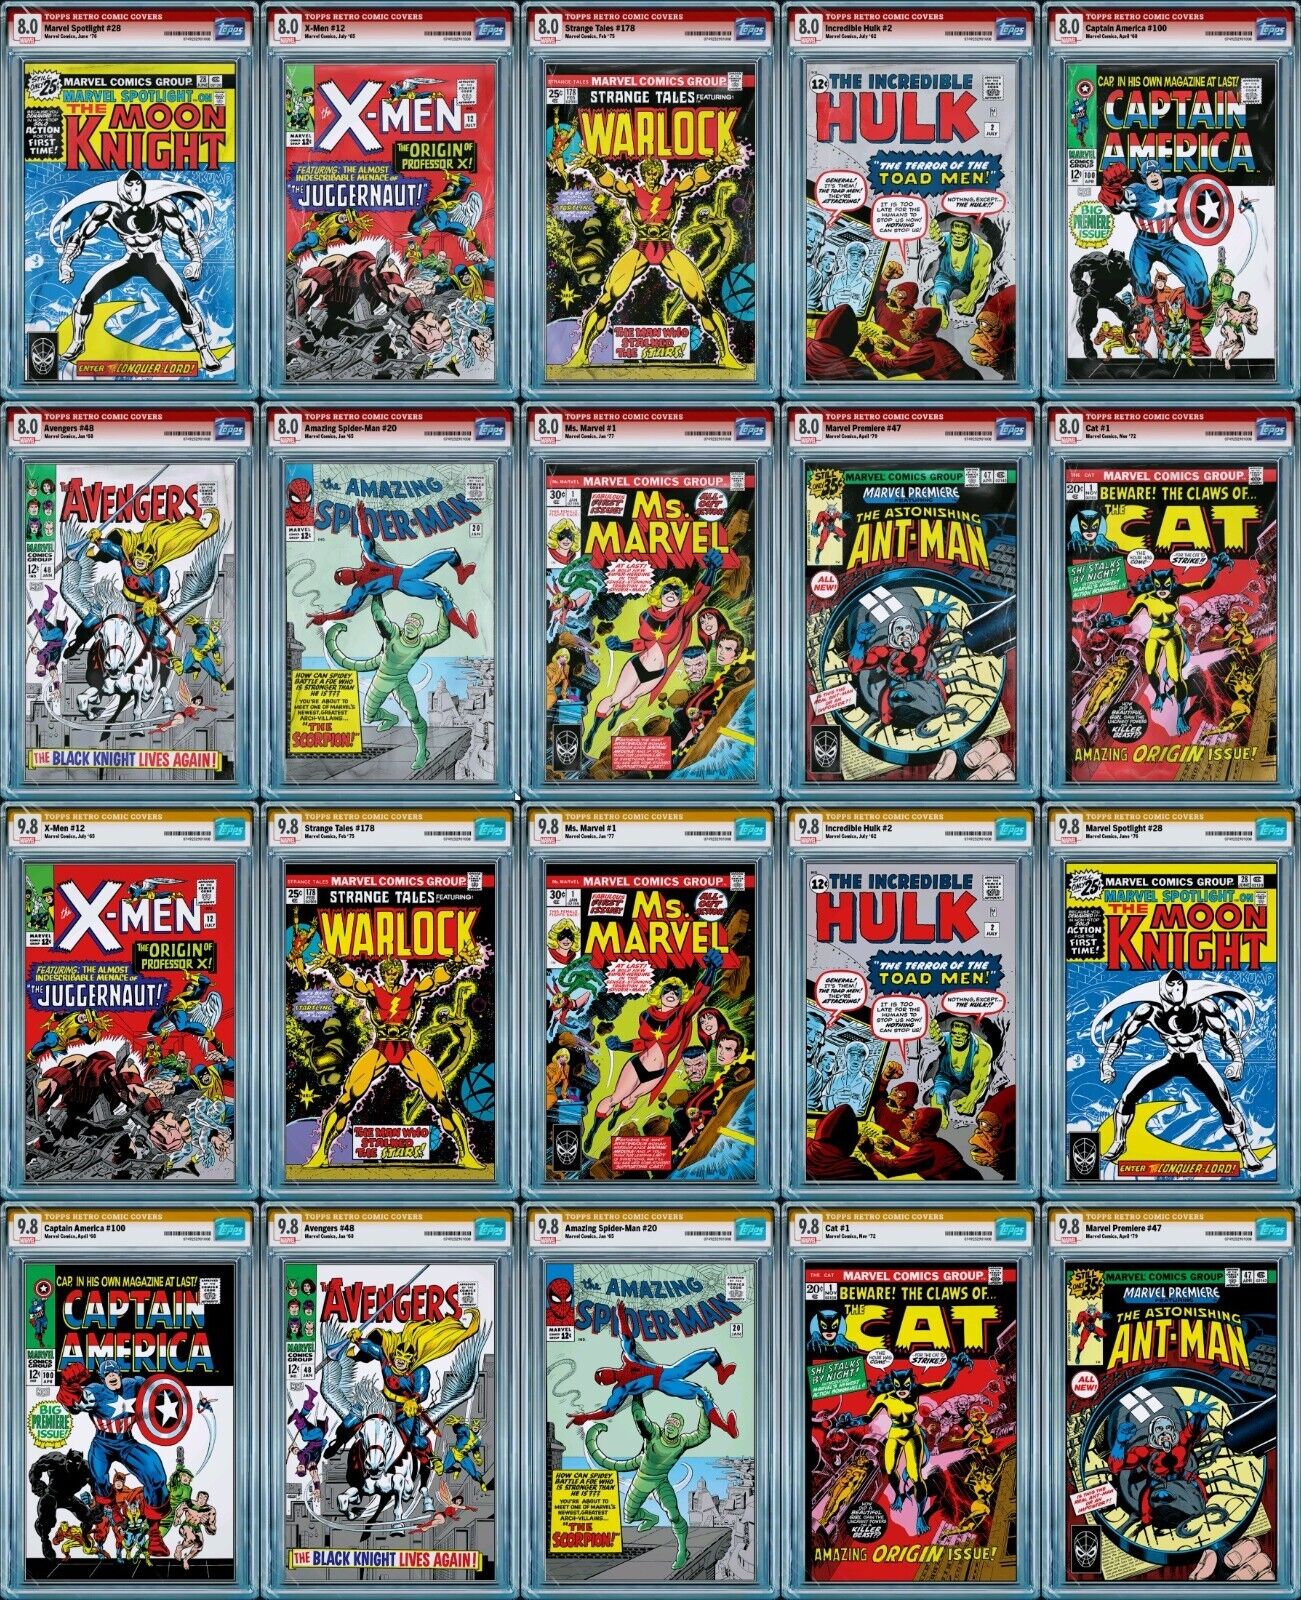 Topps Marvel Collect Retro Covers 24 Full Sets Rare/Super Rare 20 Digital Cards